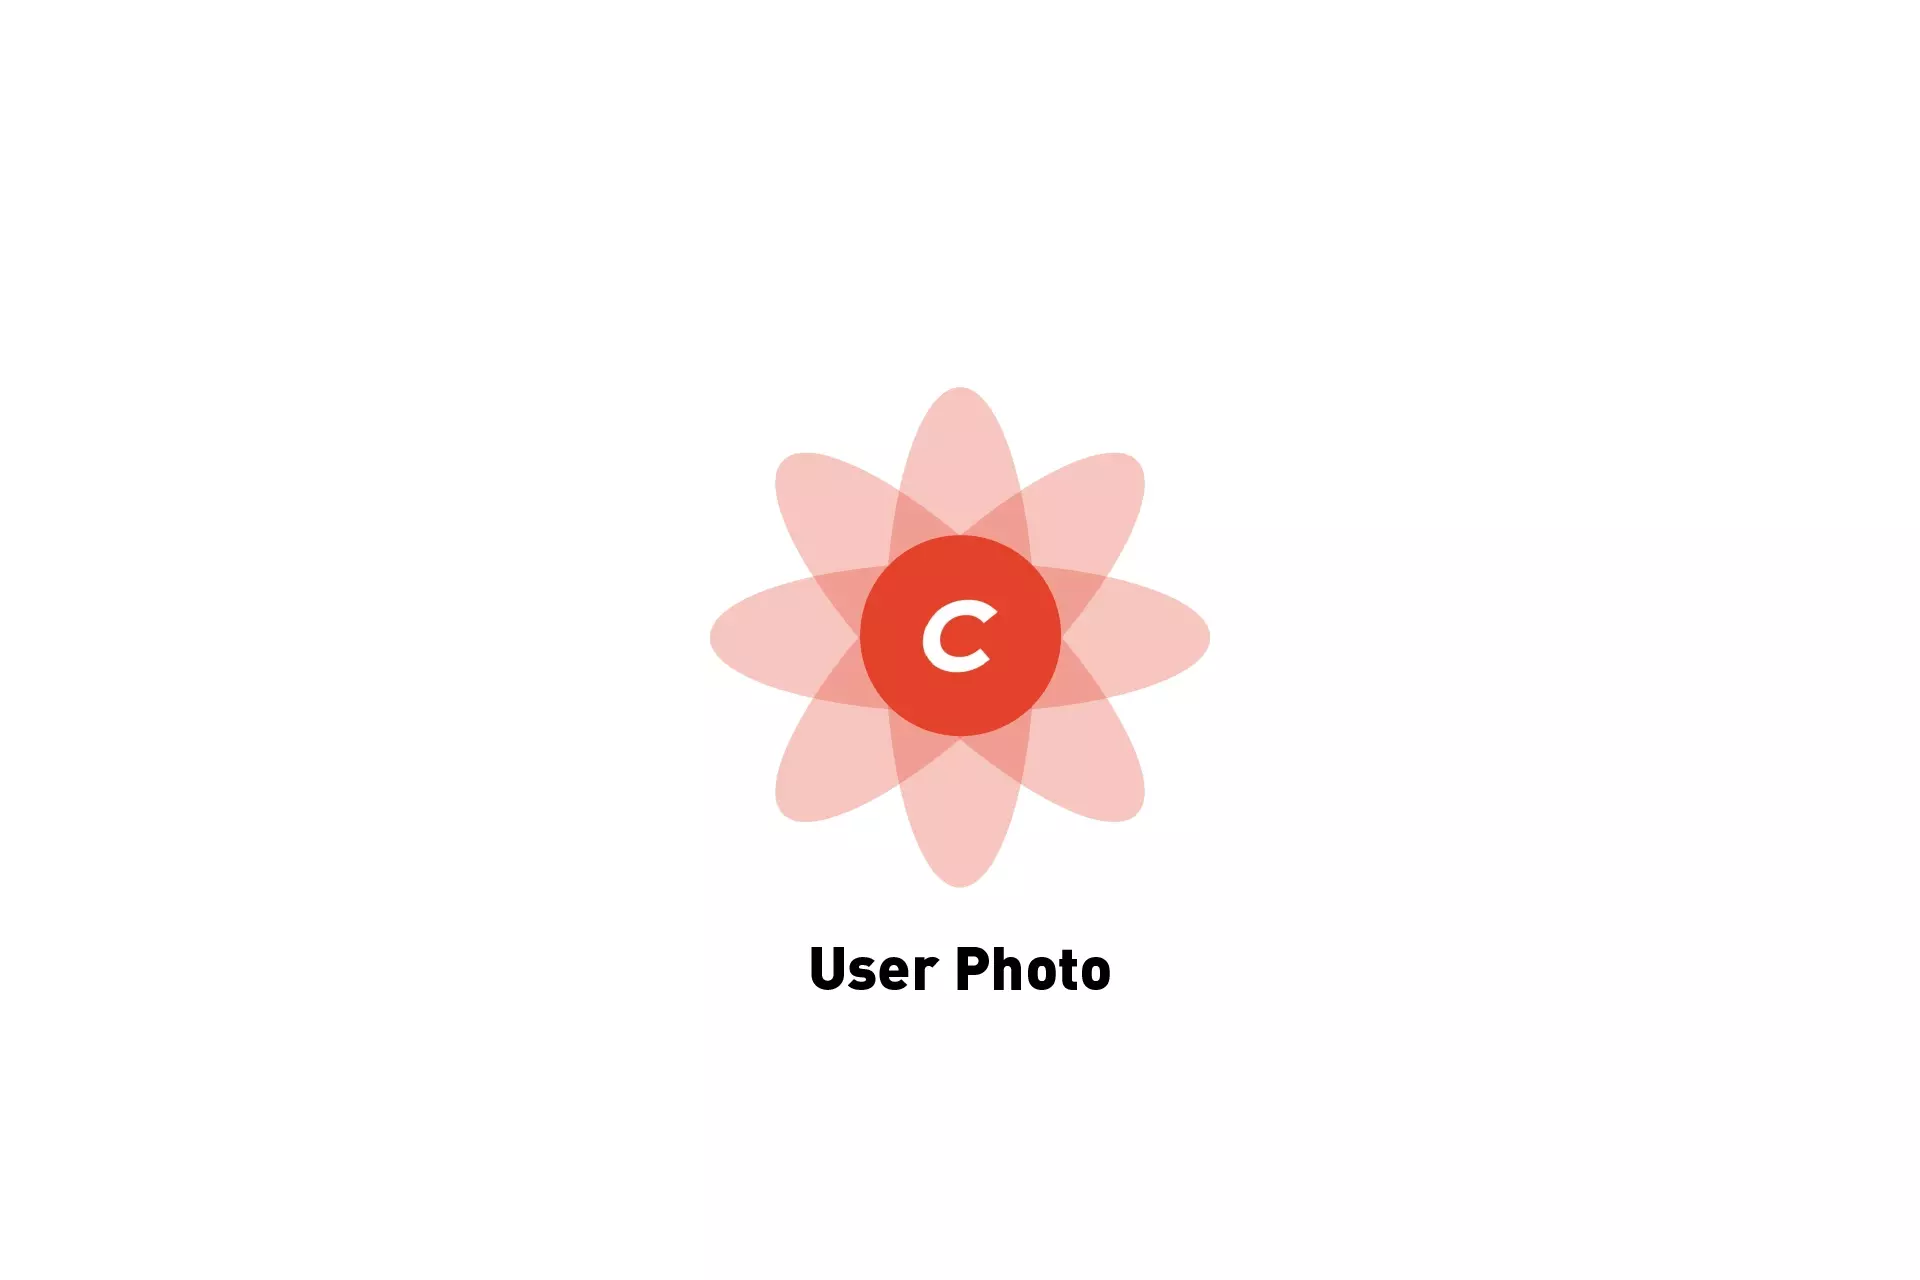 A flower that represents Craft CMS with the text "User Photo" beneath it.